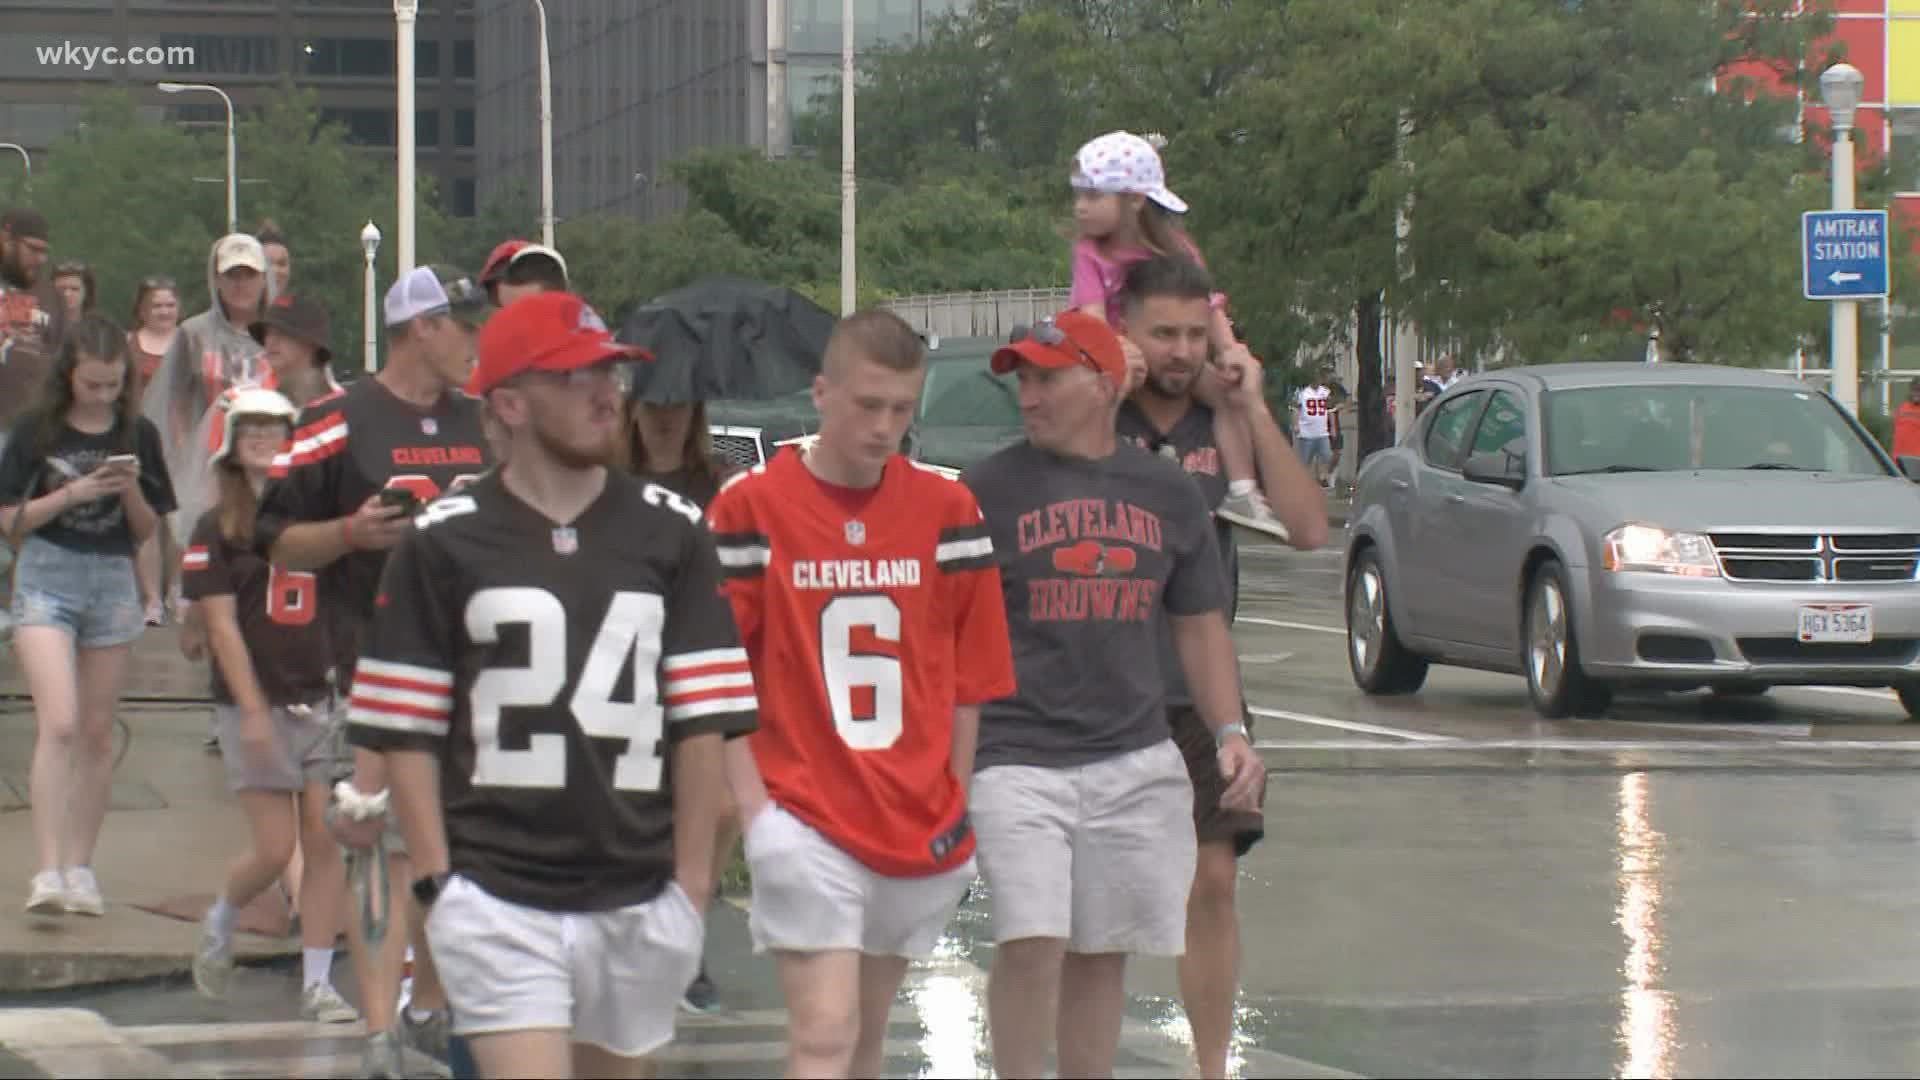 The rain did not stop fans of the Cleveland Browns from showing up on Sunday for the Orange and Brown scrimmage. 3News' Marisa Saenz has the story.